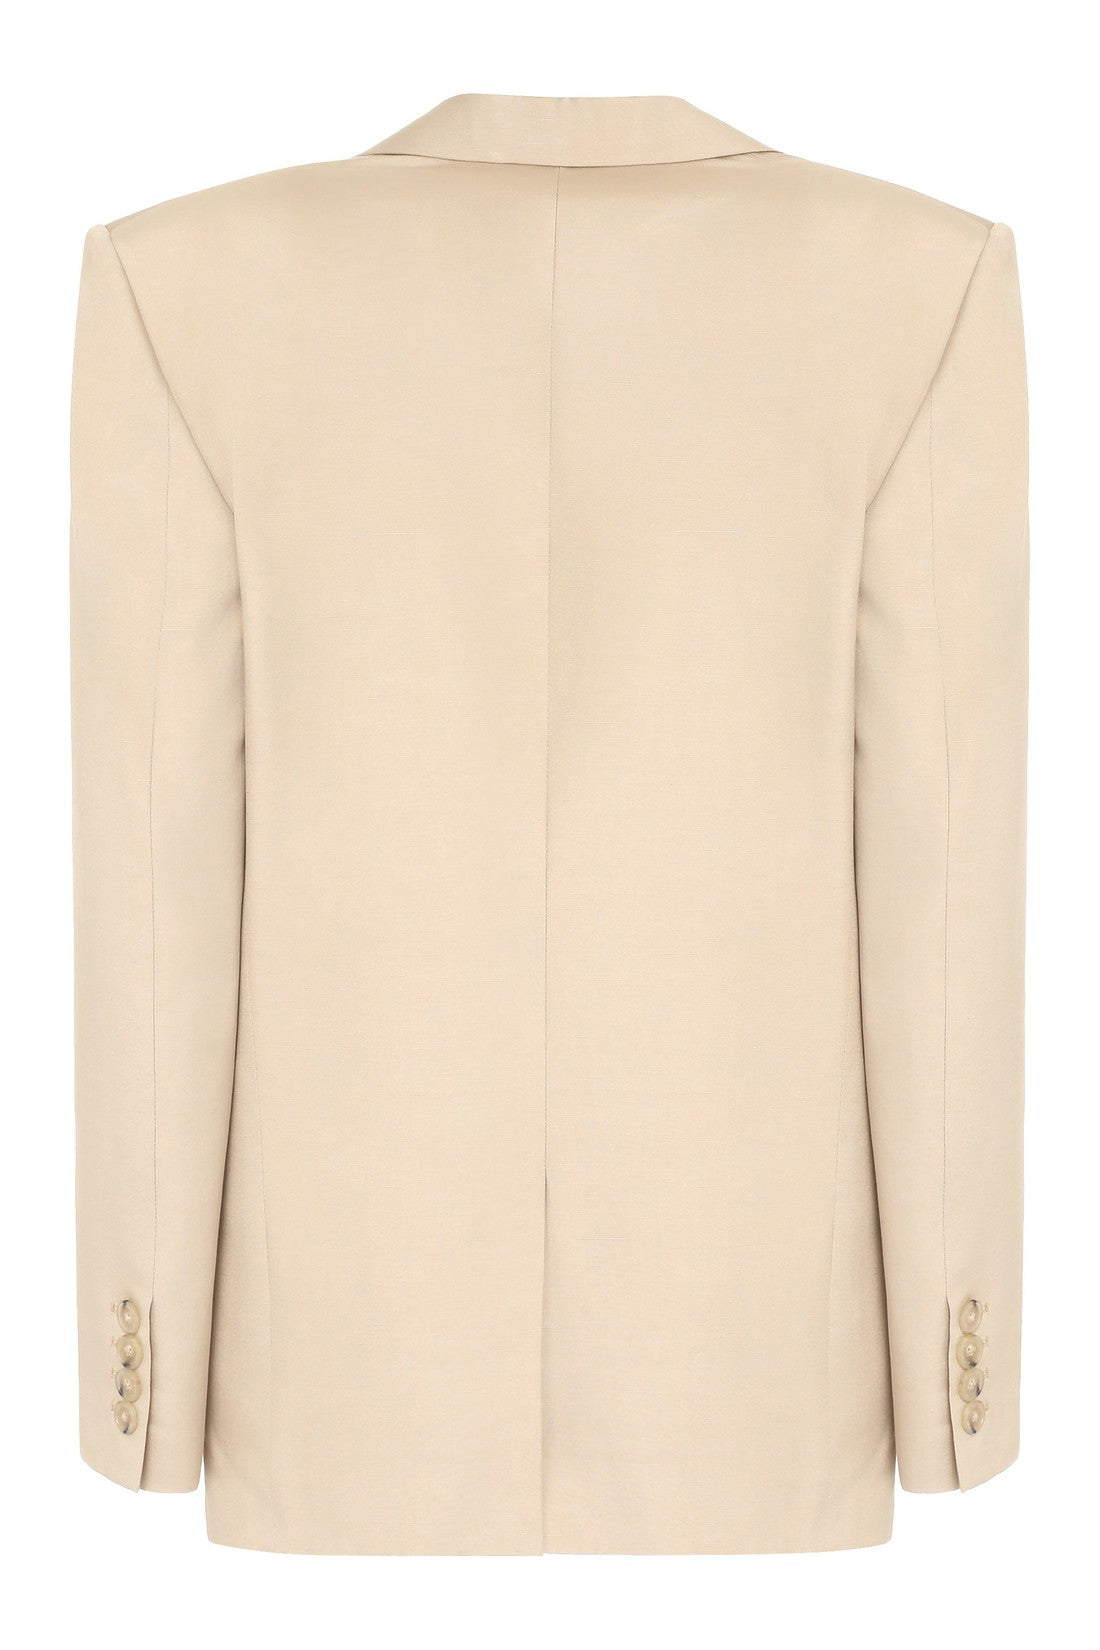 Stella McCartney-OUTLET-SALE-Single-breasted two-button jacket-ARCHIVIST